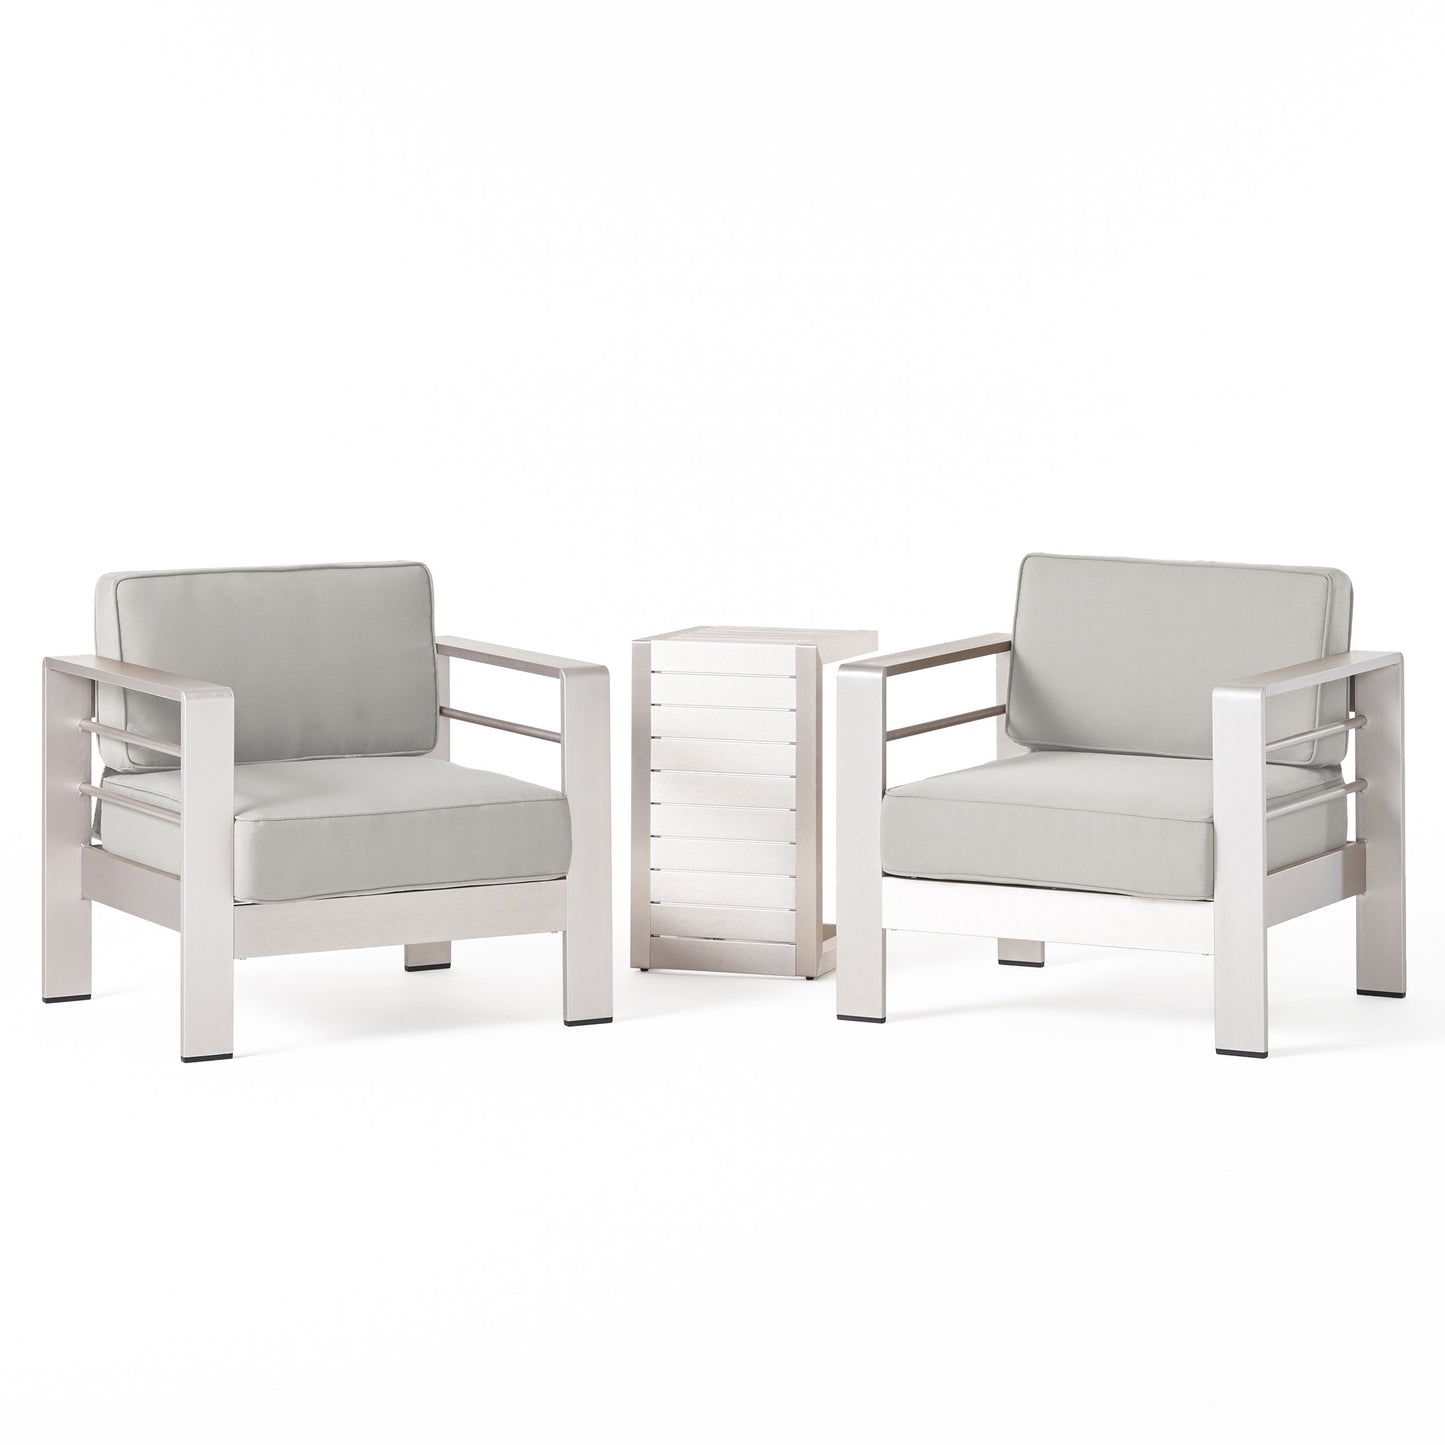 Edward Coral Outdoor Aluminum Club Chairs and Side Table Set with Cushions